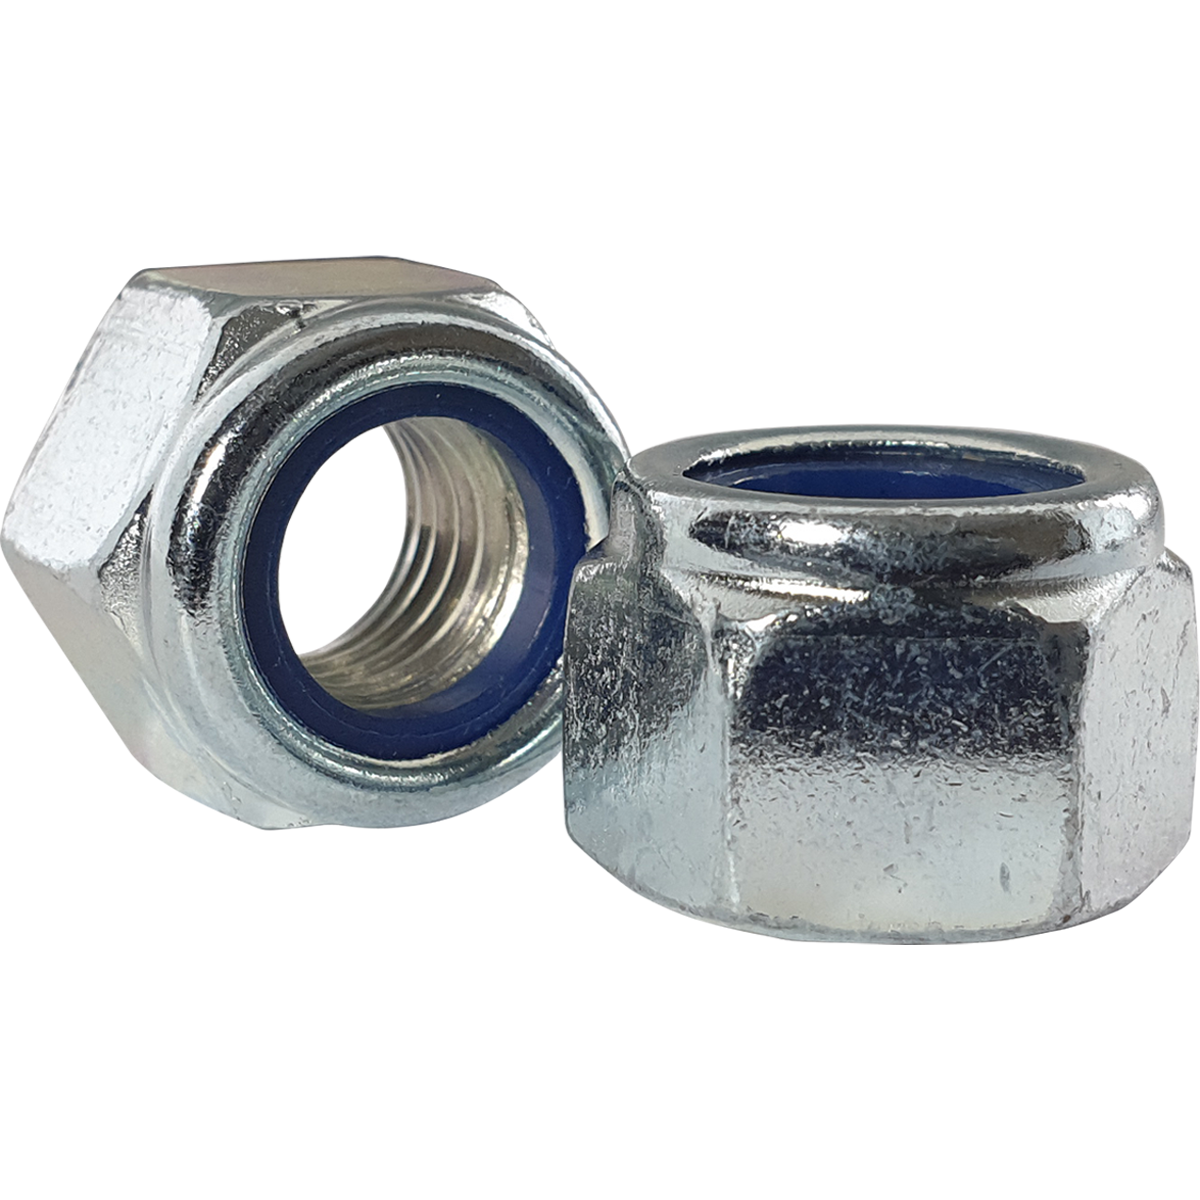 BZP (Bright Zinc Plated), high-type, nylon insert nuts, which are also known as nyloc nuts or nylon insert lock nuts.